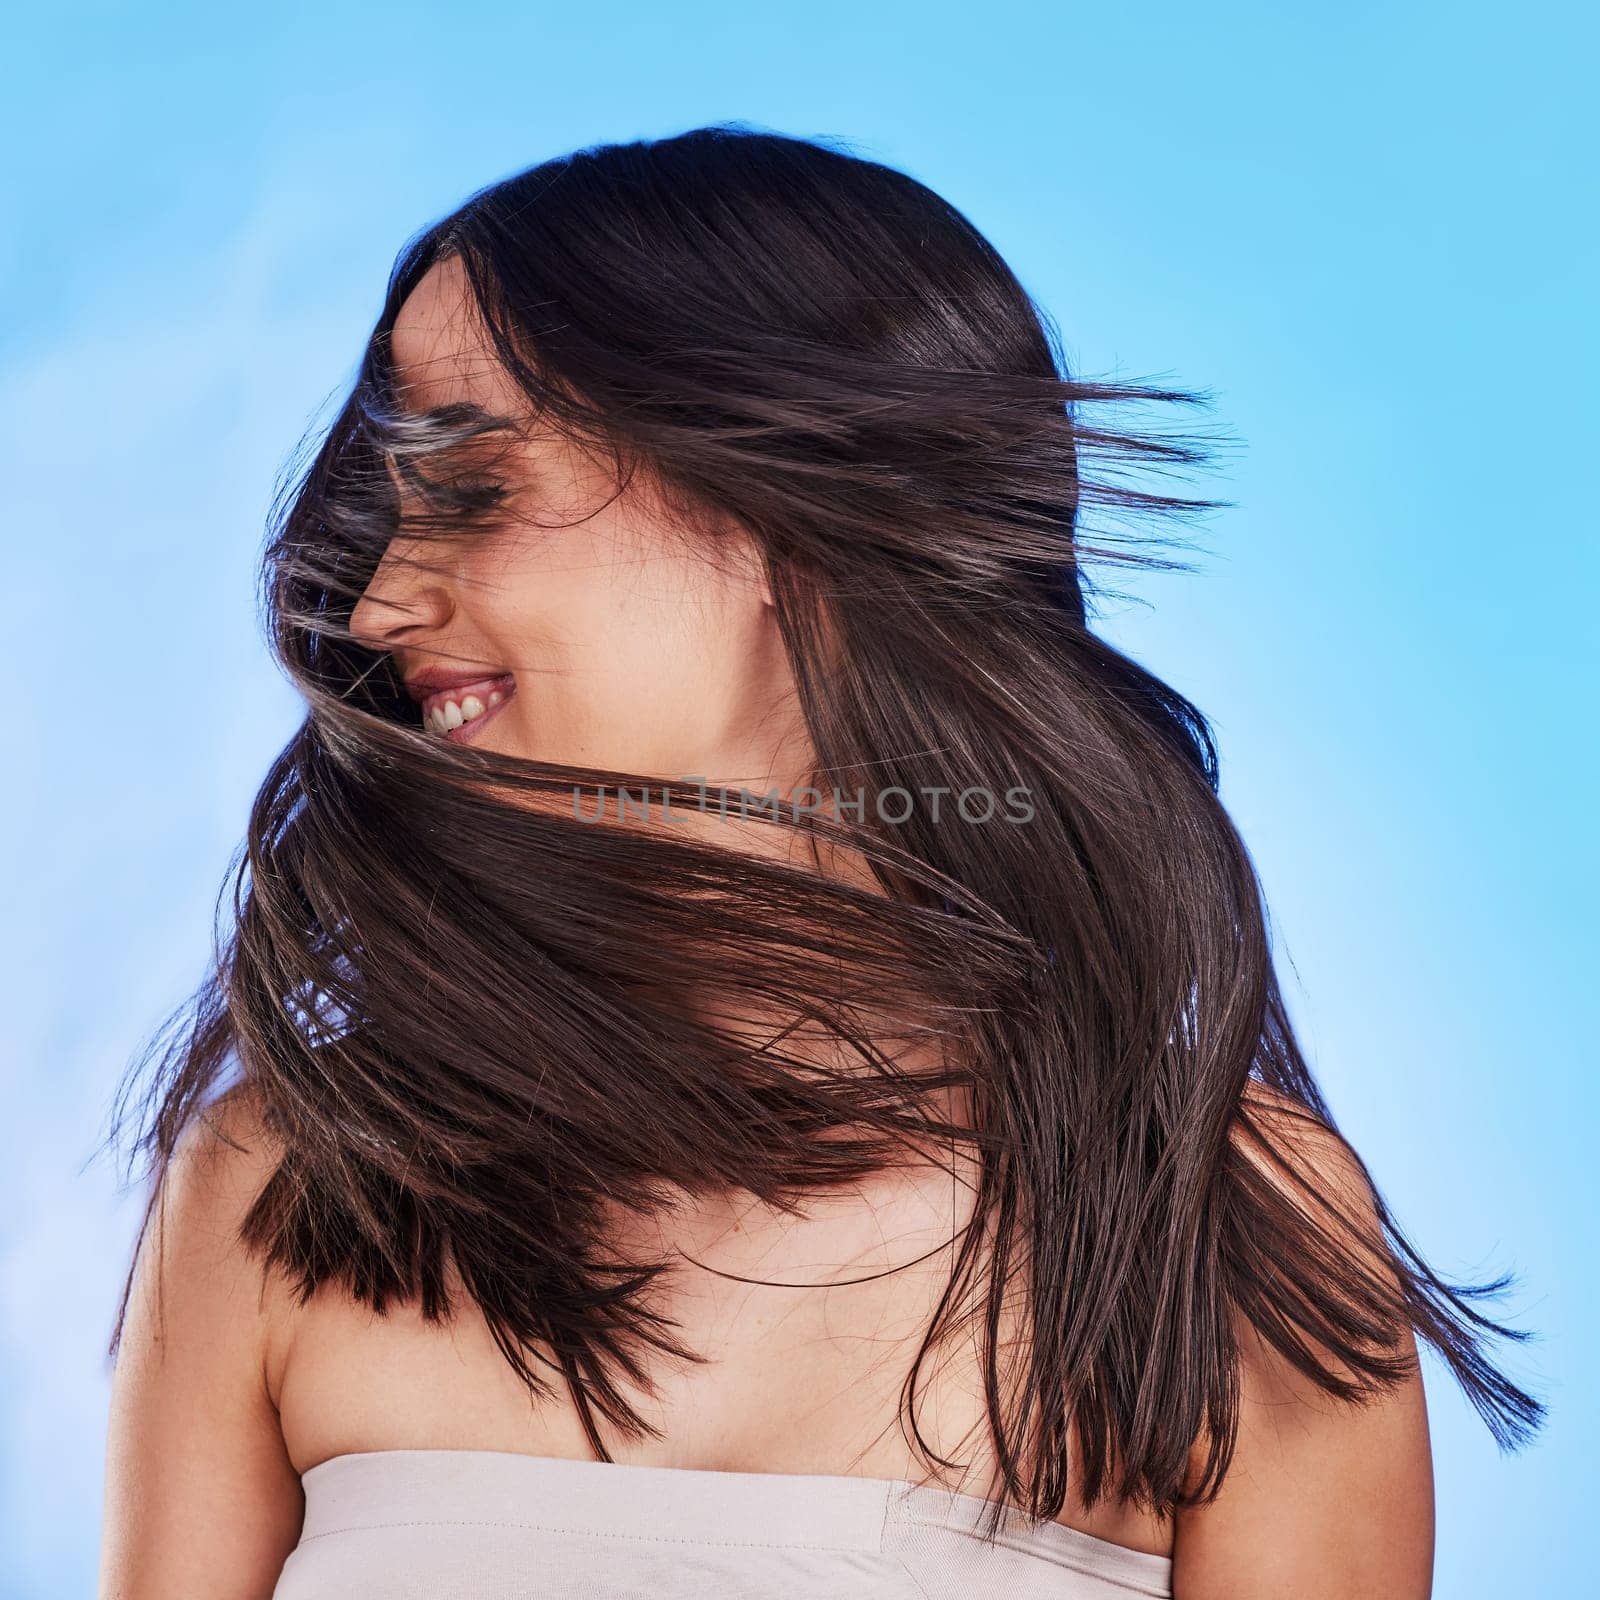 Woman, shake hair and beauty with shine, volume and texture against a blue studio background. Growth, person and model satisfied with salon treatment, glow and change with self care, playful and fun by YuriArcurs